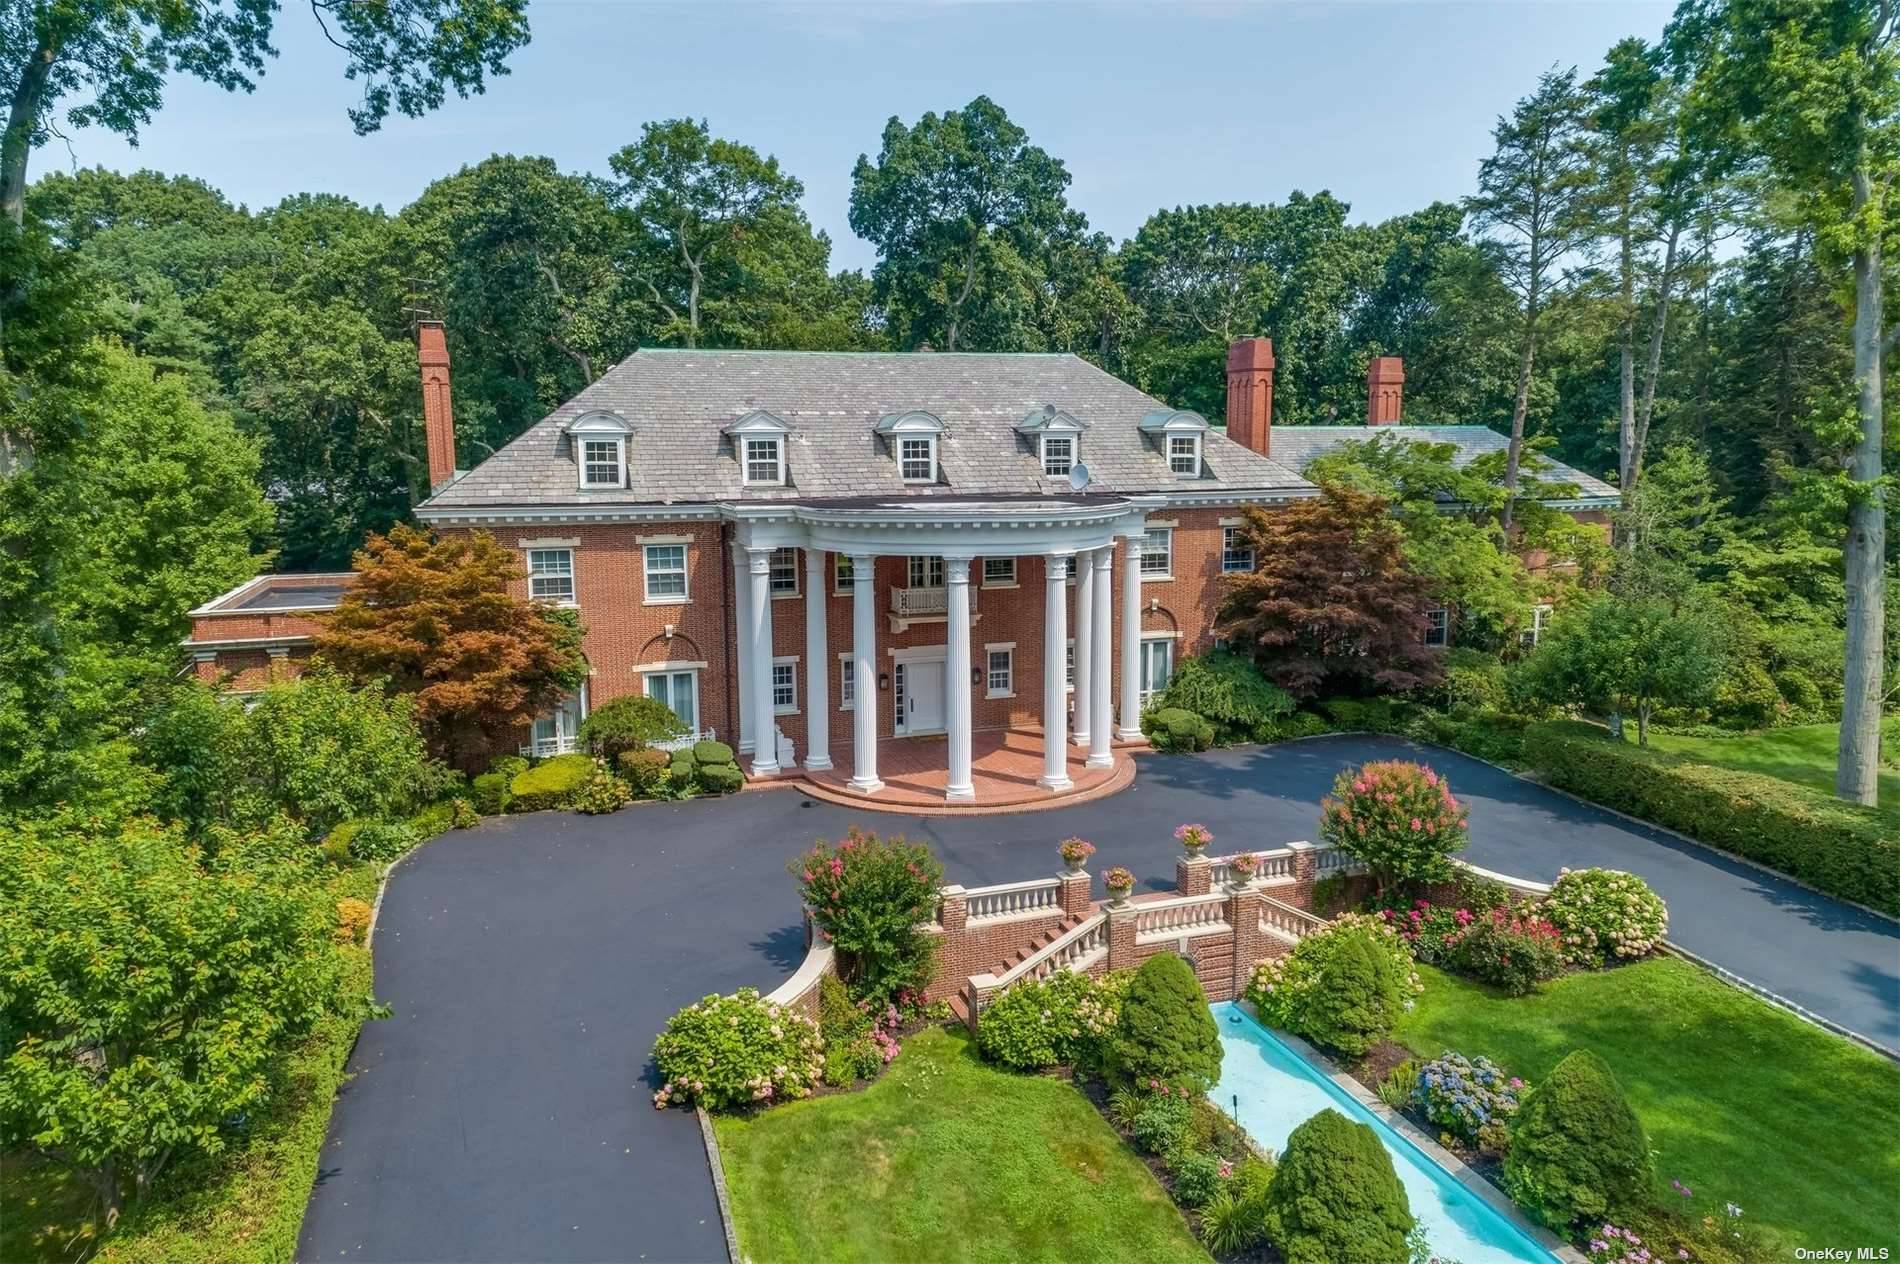 This remarkable brick Georgian revival Mansion by architect Henry Otis Chapman.